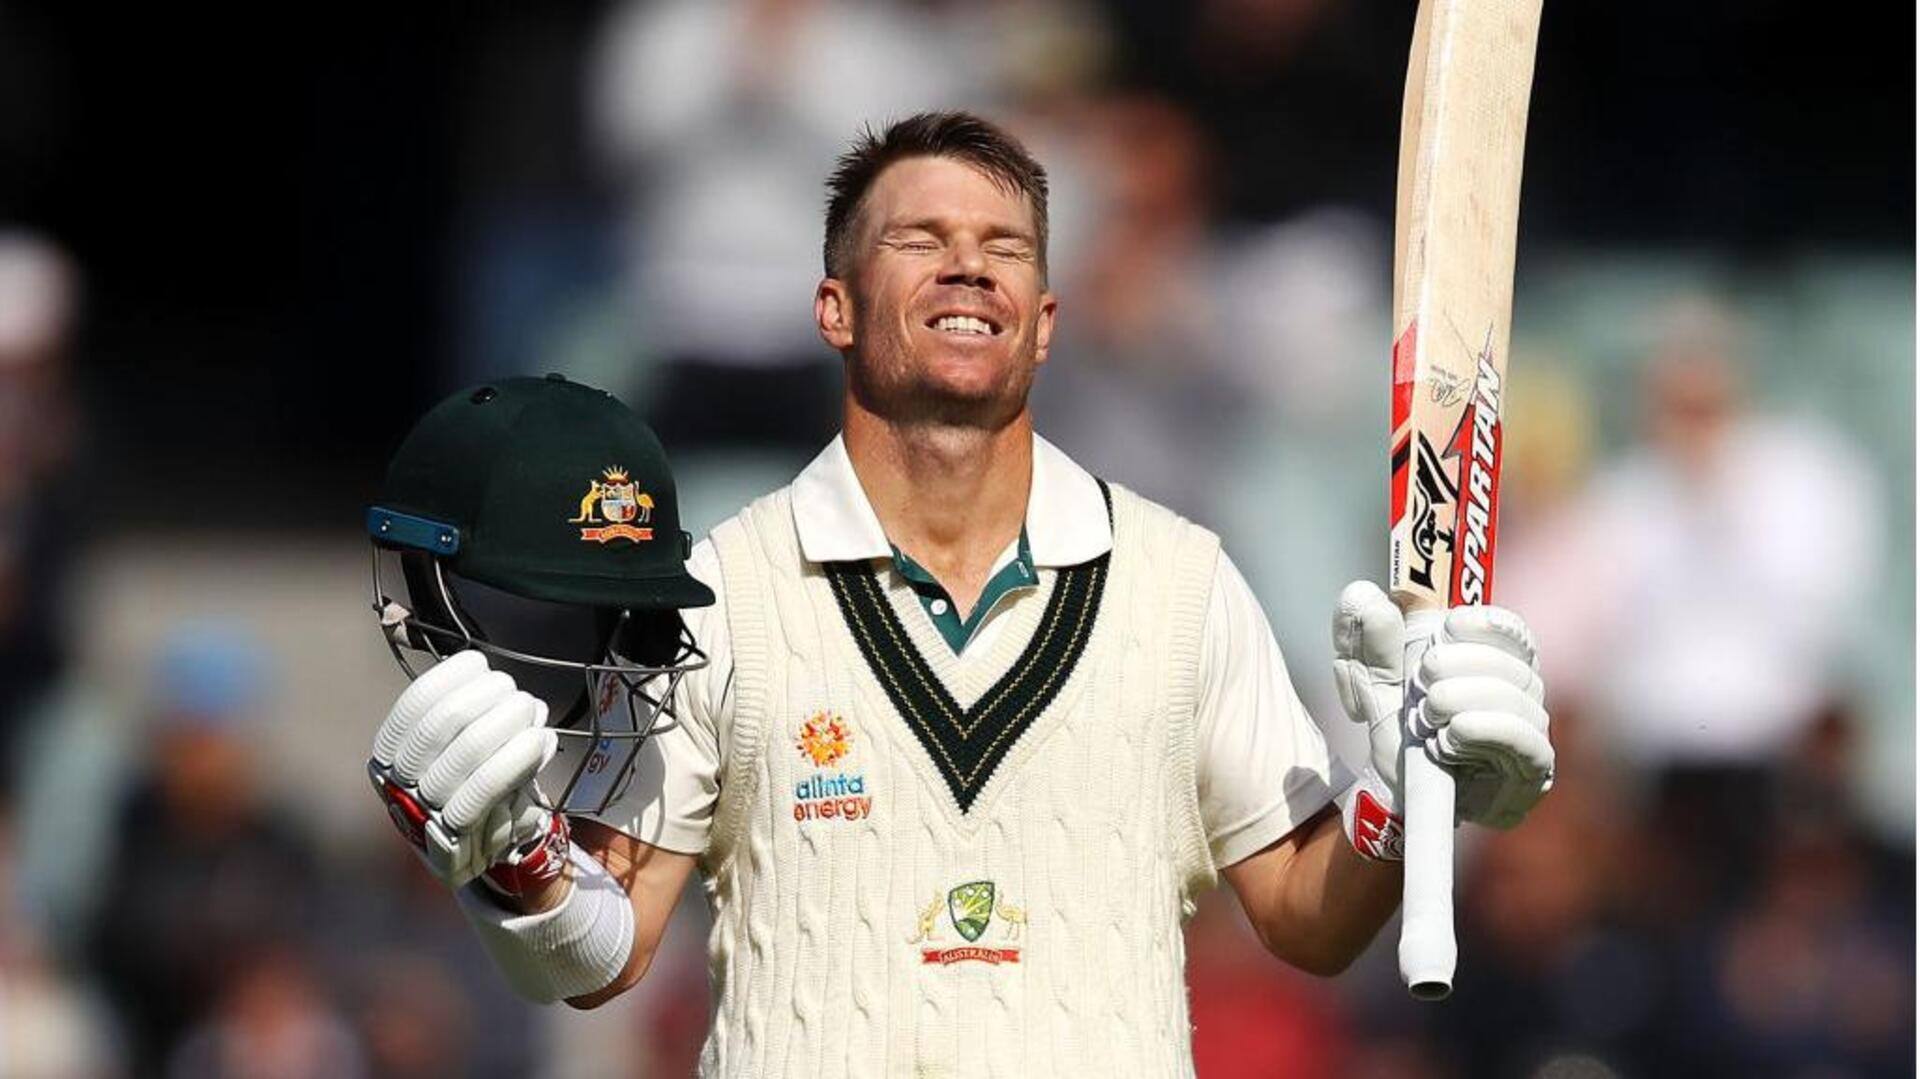 Players who can replace David Warner as Australia's opener (Tests)